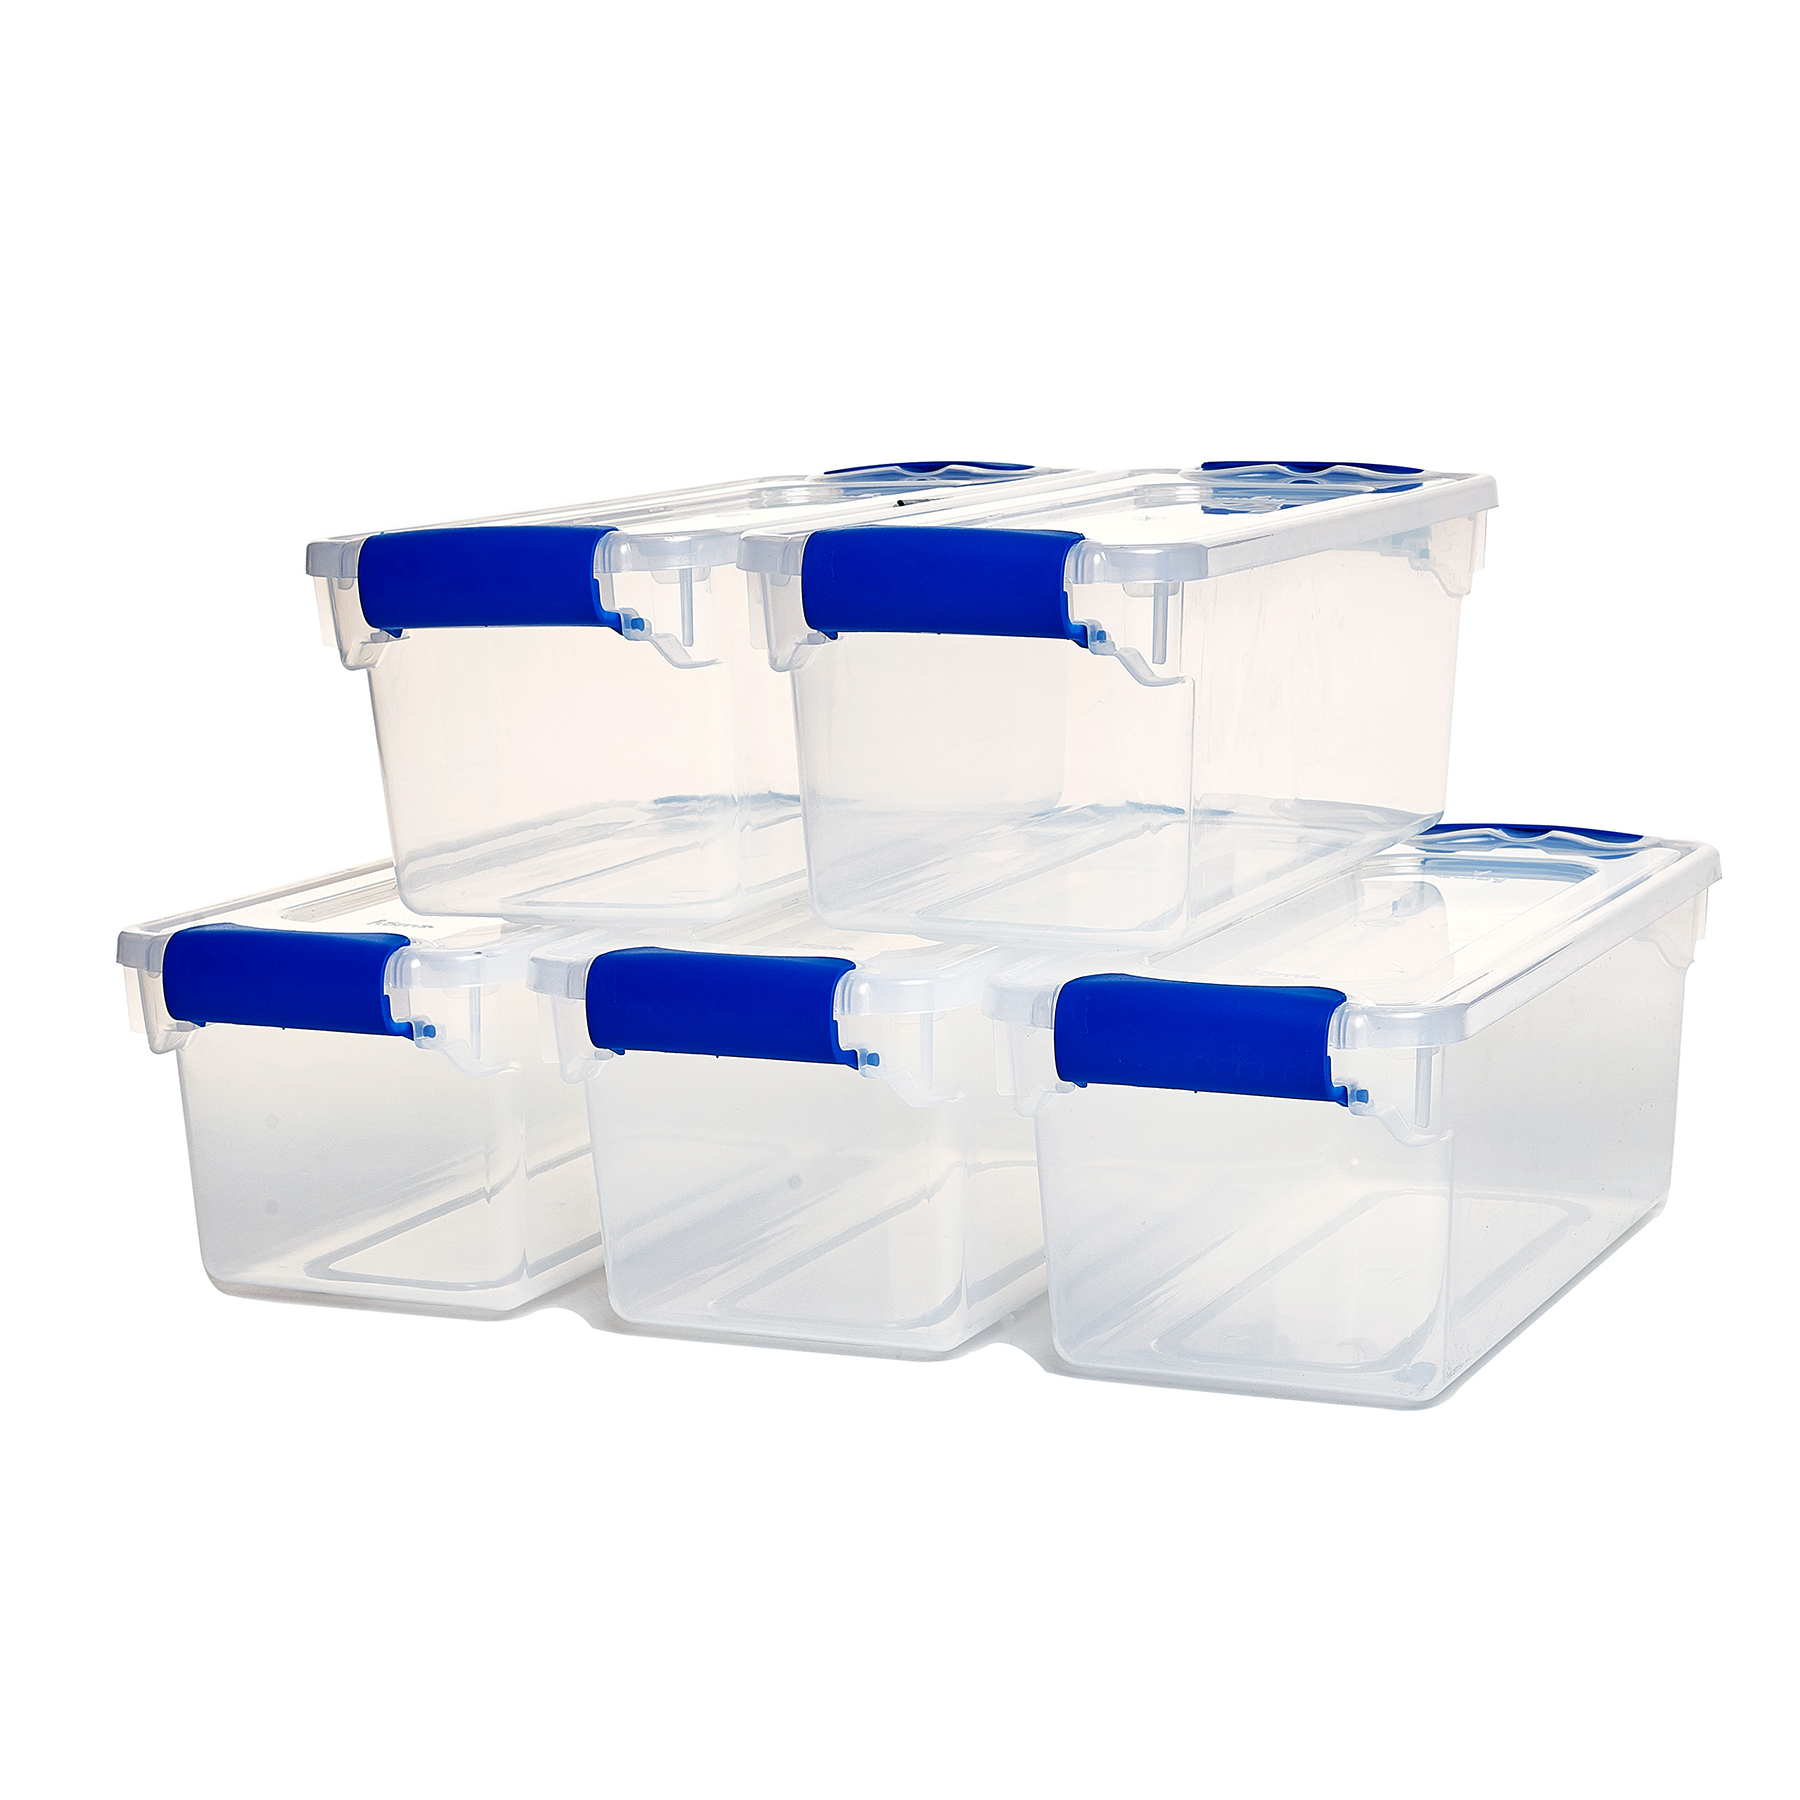 Homz 7.5qt Latching Plastic Storage Container, Clear/Blue, Set of 5 - image 2 of 7